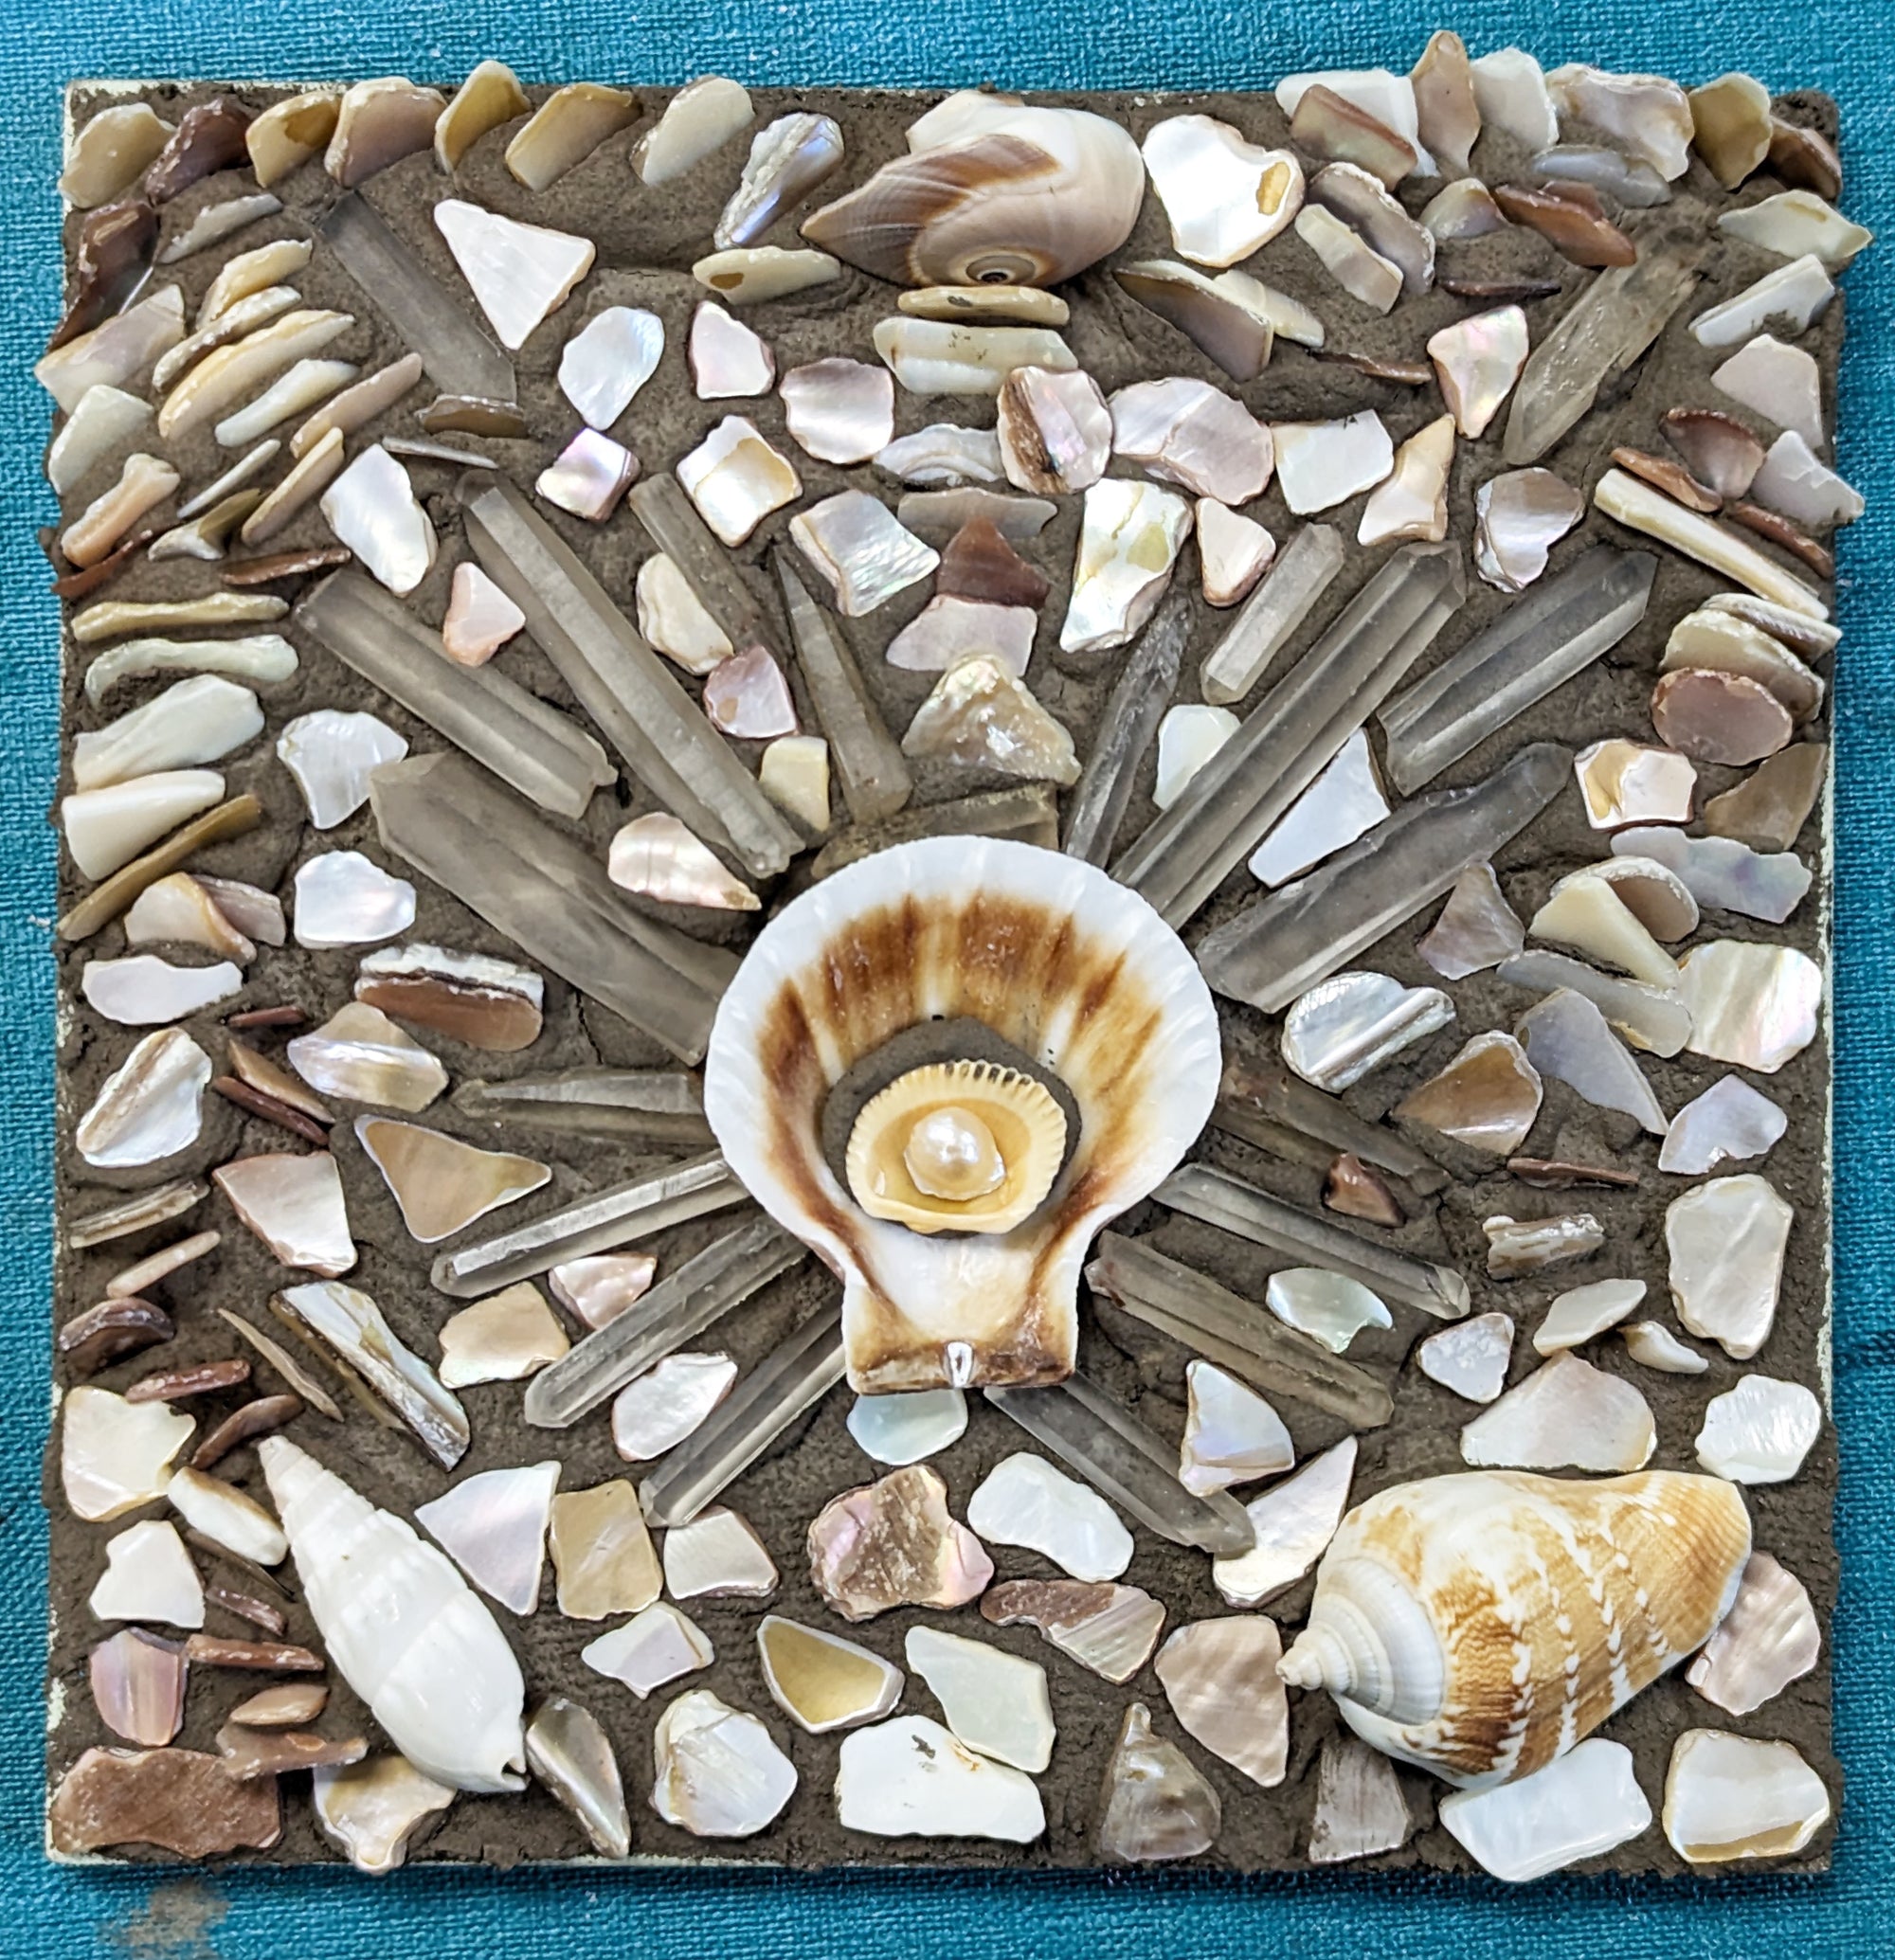 Mosaic made of shells and other found material on a blue background.